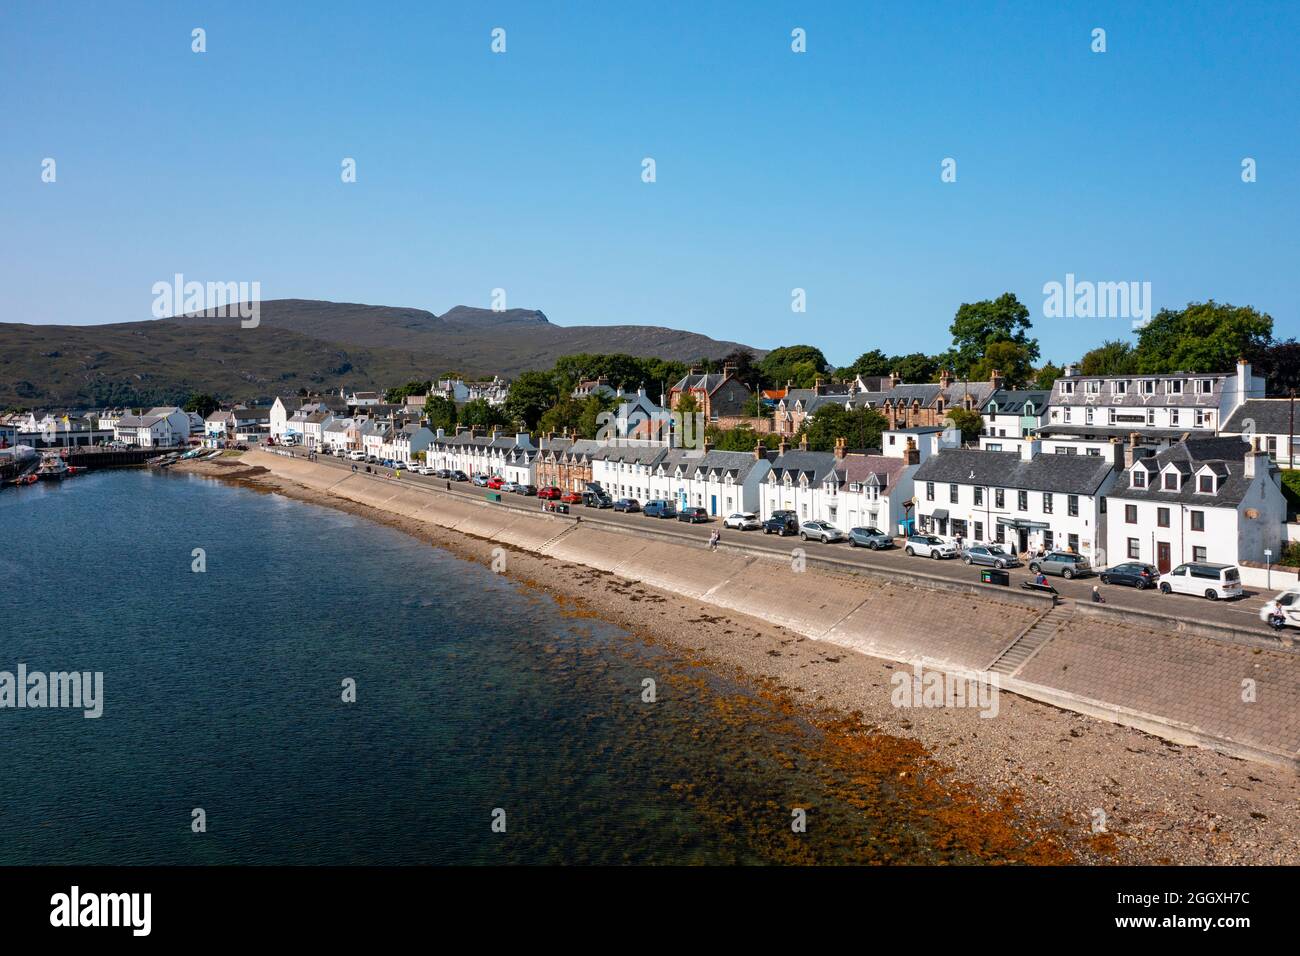 View  of row of whitewashed terraced row of houses in Ullapool, Ross and Cromarty, Highland Region, Scotland, Uk Stock Photo